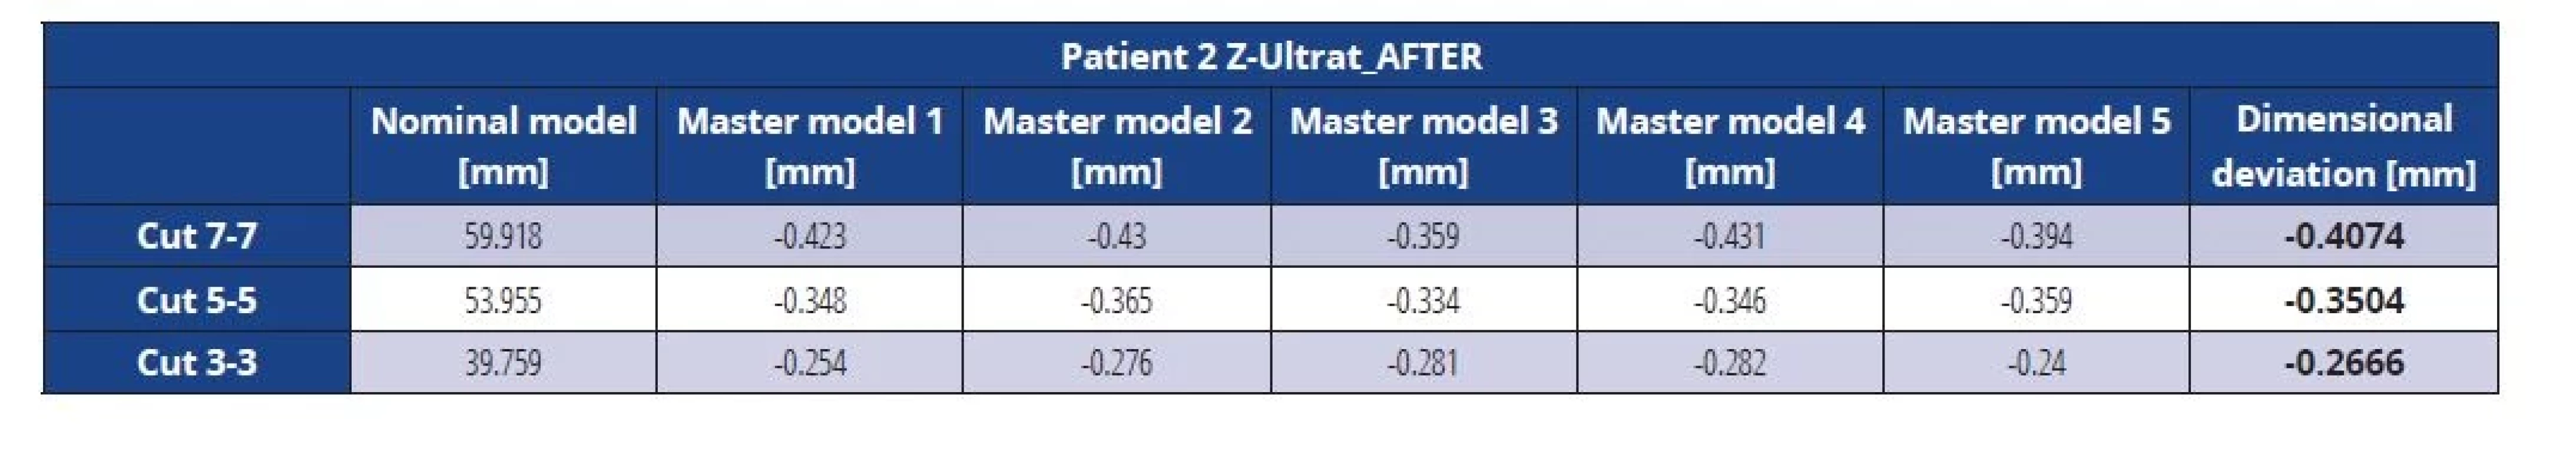 Dimensional deviations of the Z-Ultrat master model after vacuuming (patient 2)